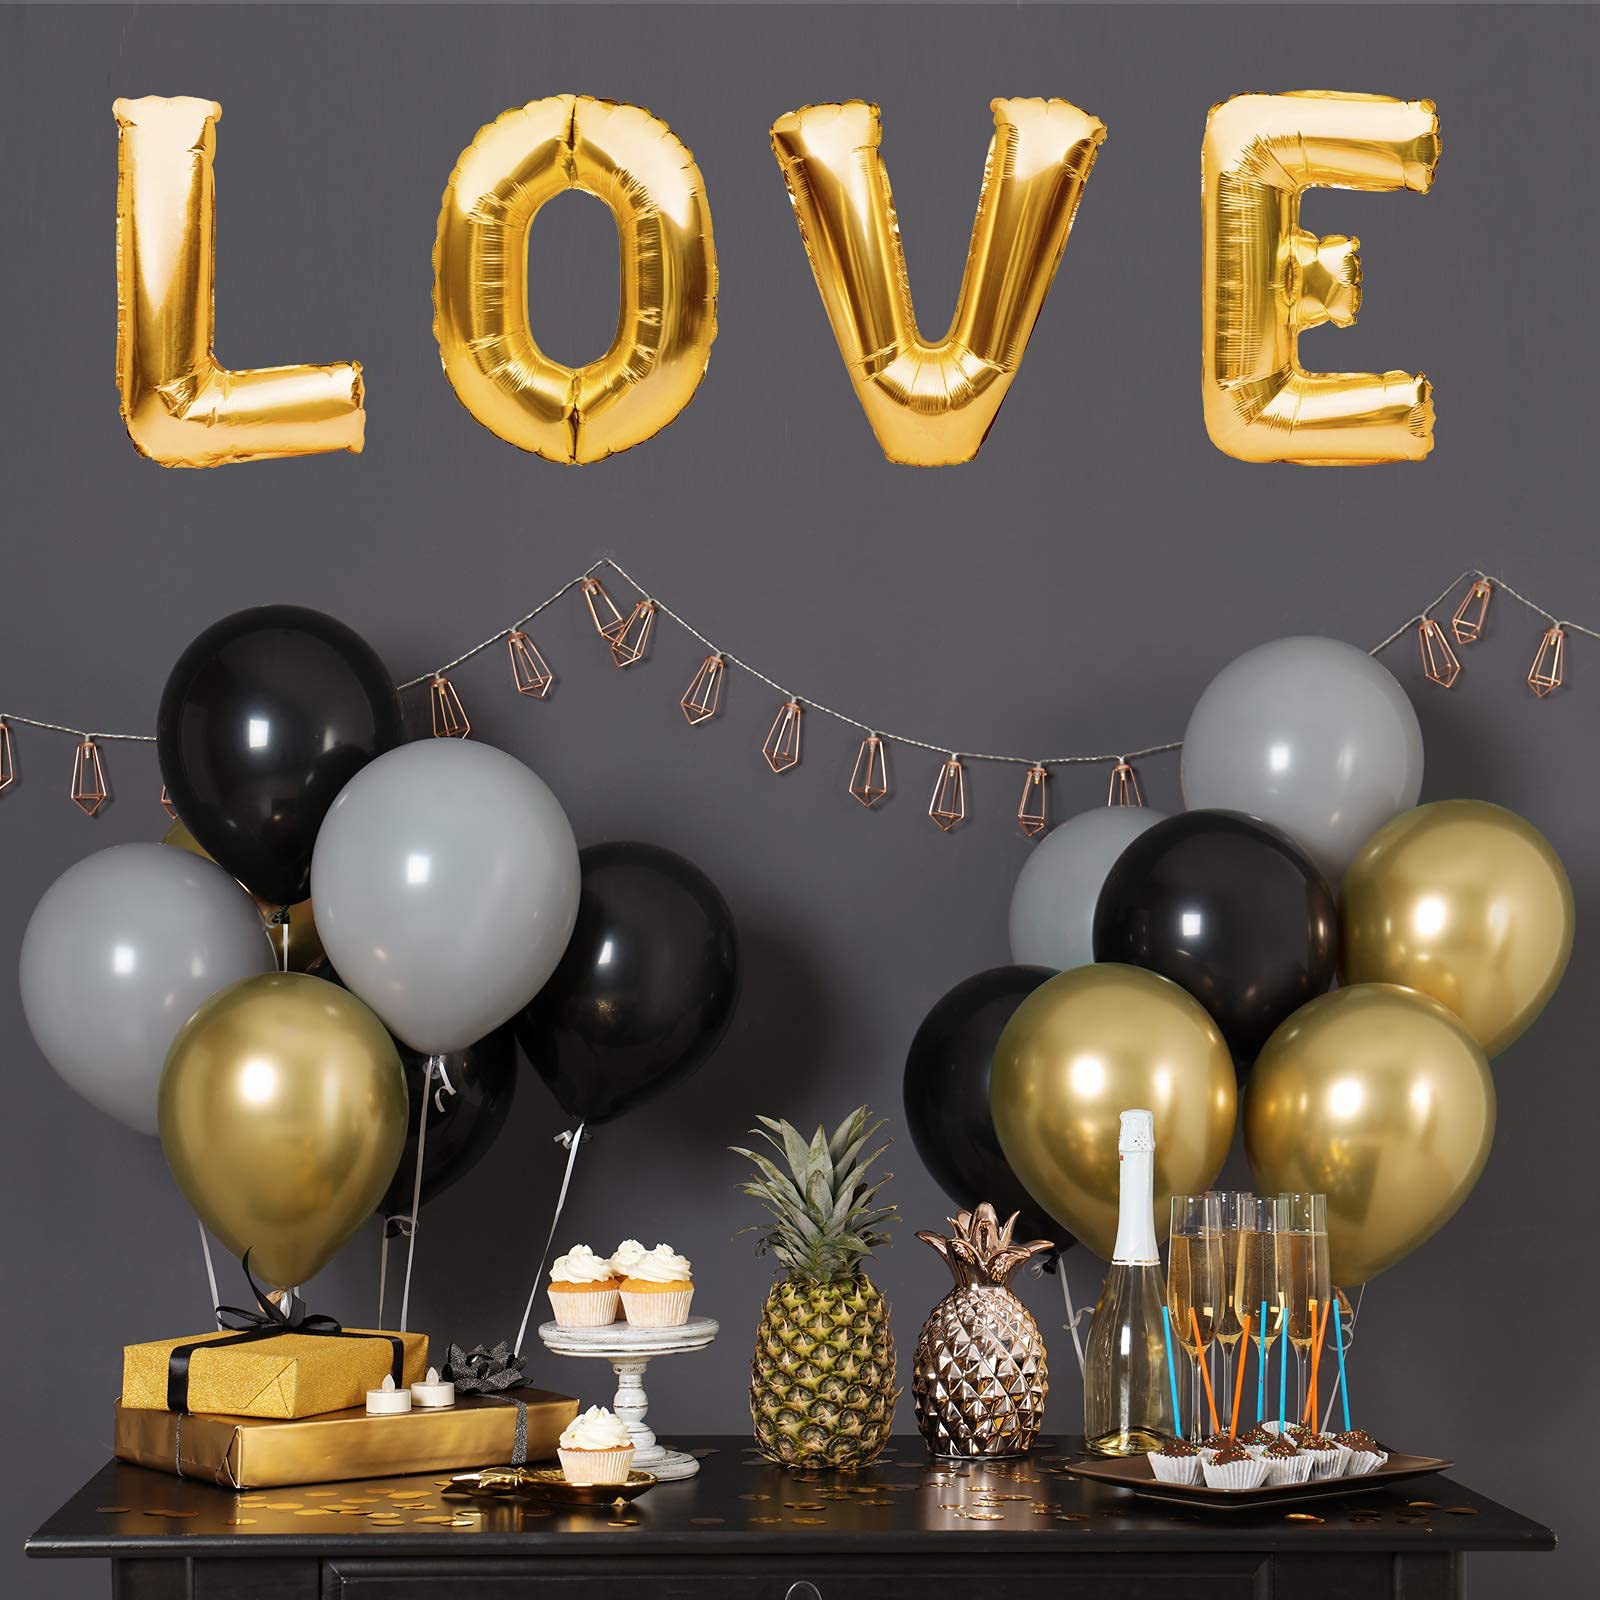 RUBFAC 92pcs Metallic Gold Balloons and 105pcs Dark Green Balloons Different Sizes 5/10/12/18 Inch Balloon Garland Kit for Birthday Party Wedding Holiday Decorations